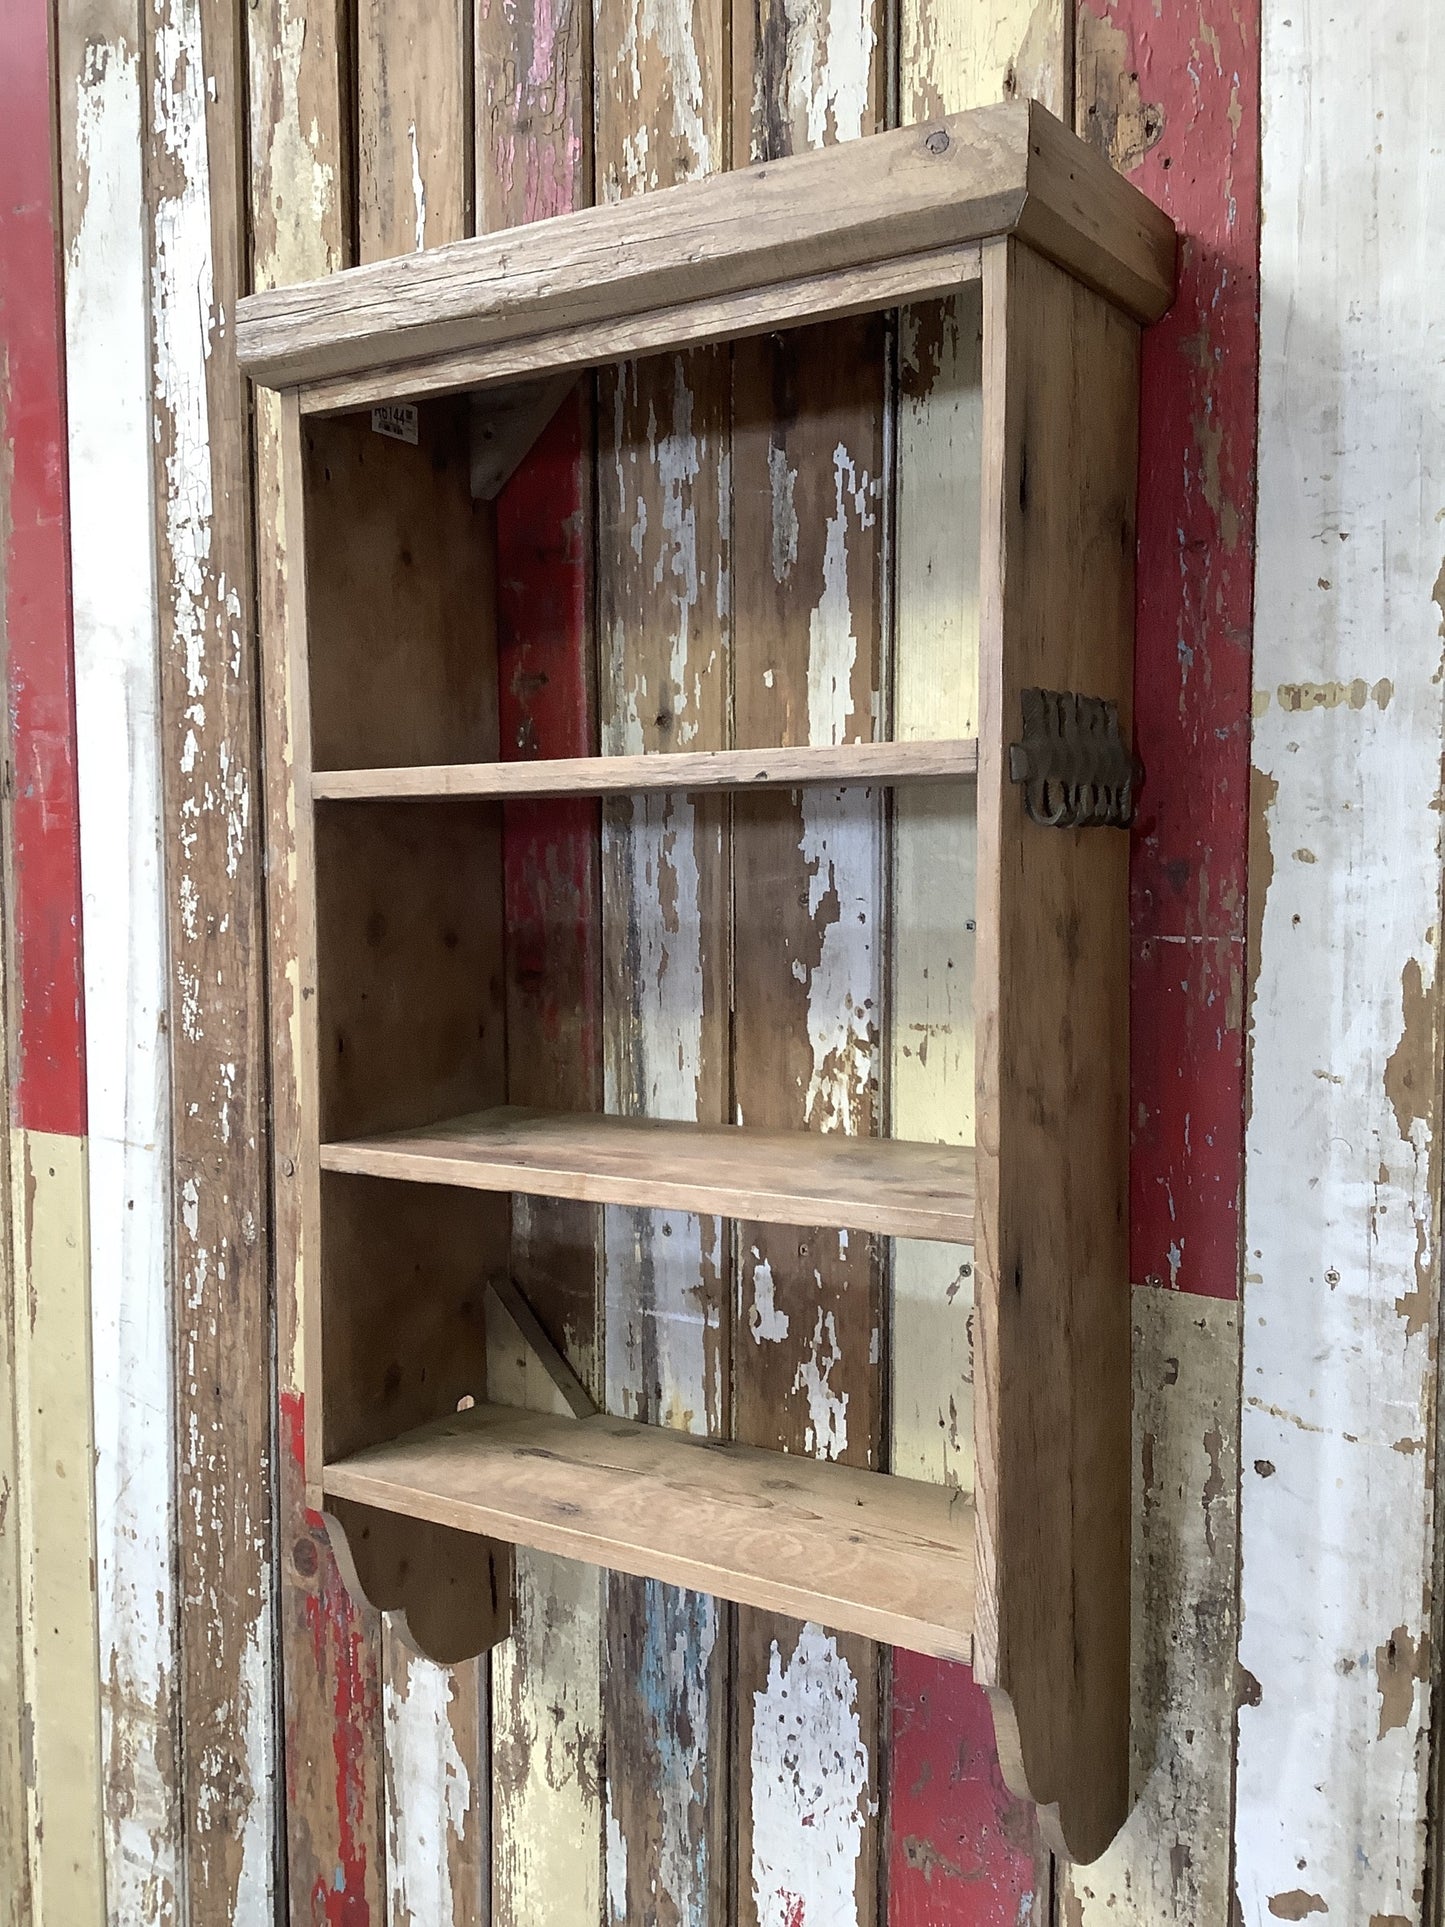 Old Stripped Pine Wall Kitchen Shelves 3 Wooden 2'11"H 1'8" W